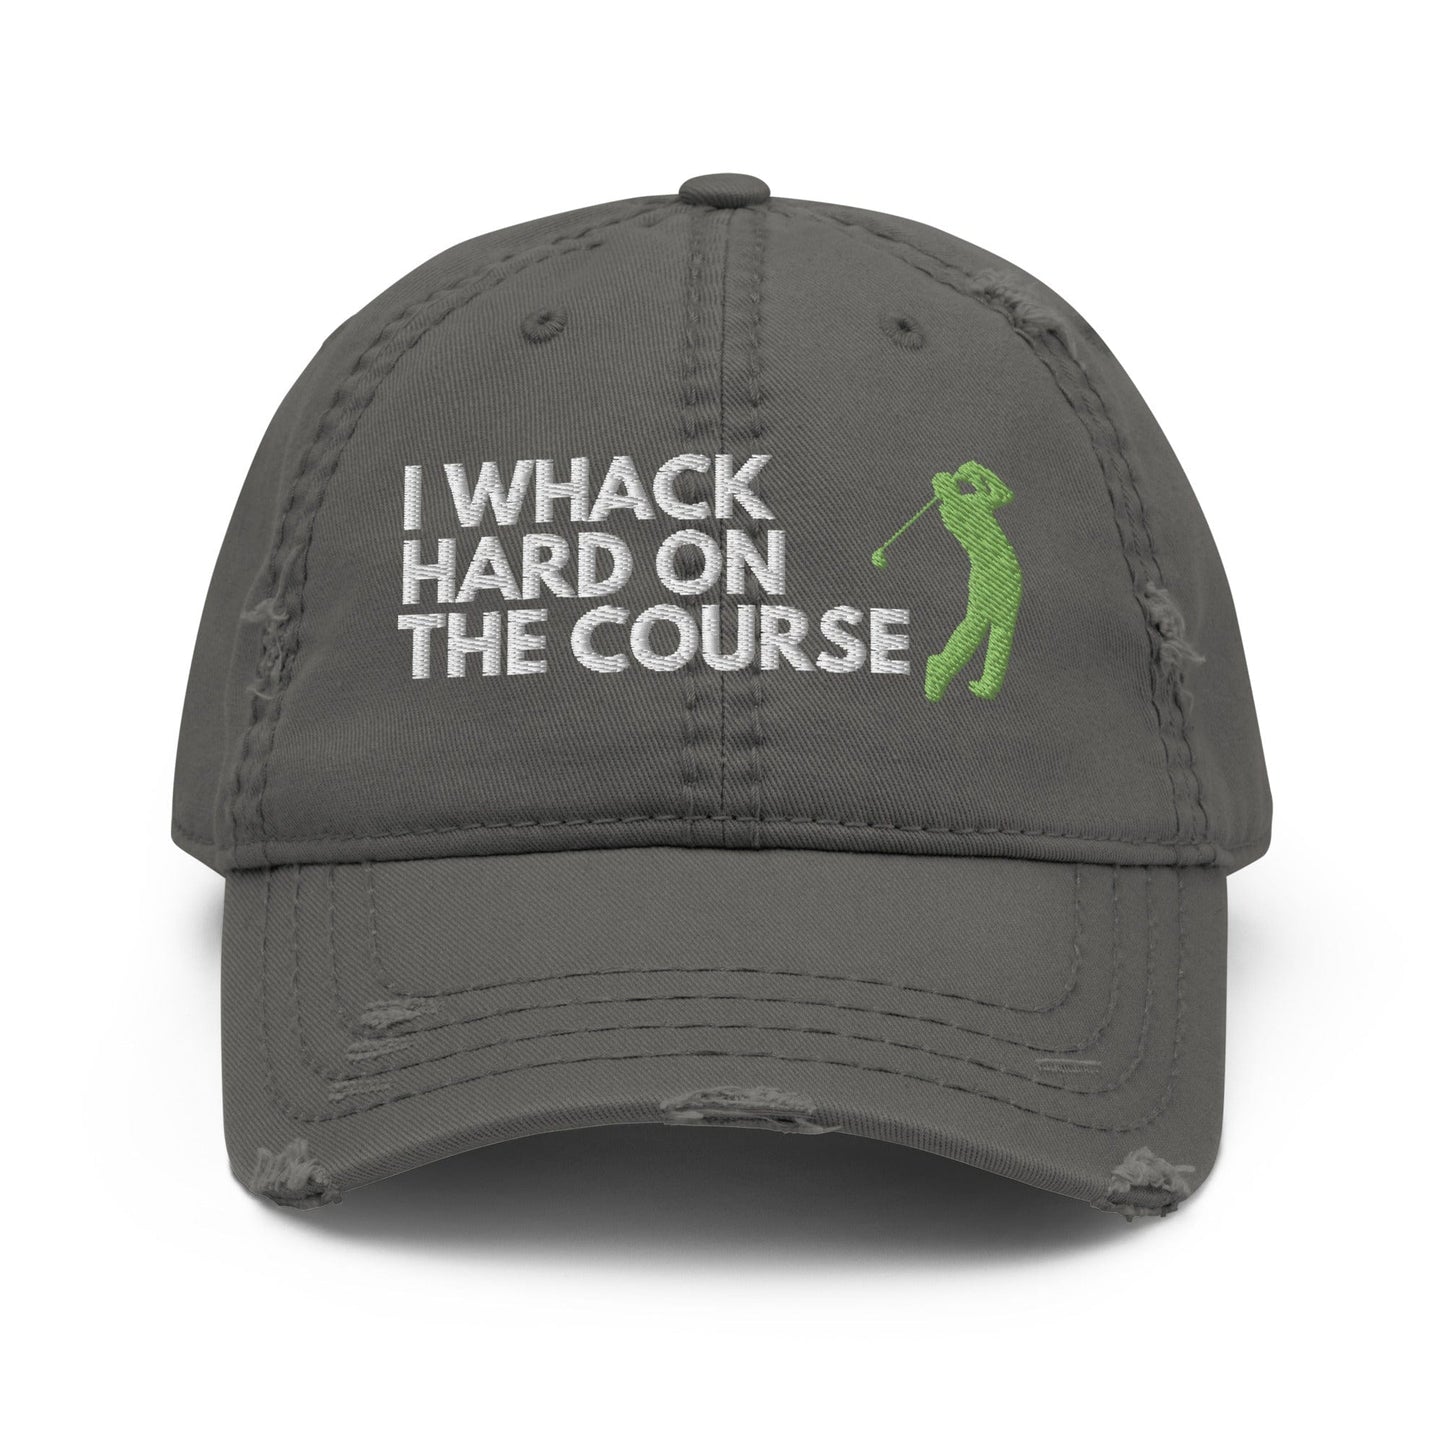 Funny Golfer Gifts  Distressed Cap Charcoal Grey I Whack Hard On The Course Distressed Hat